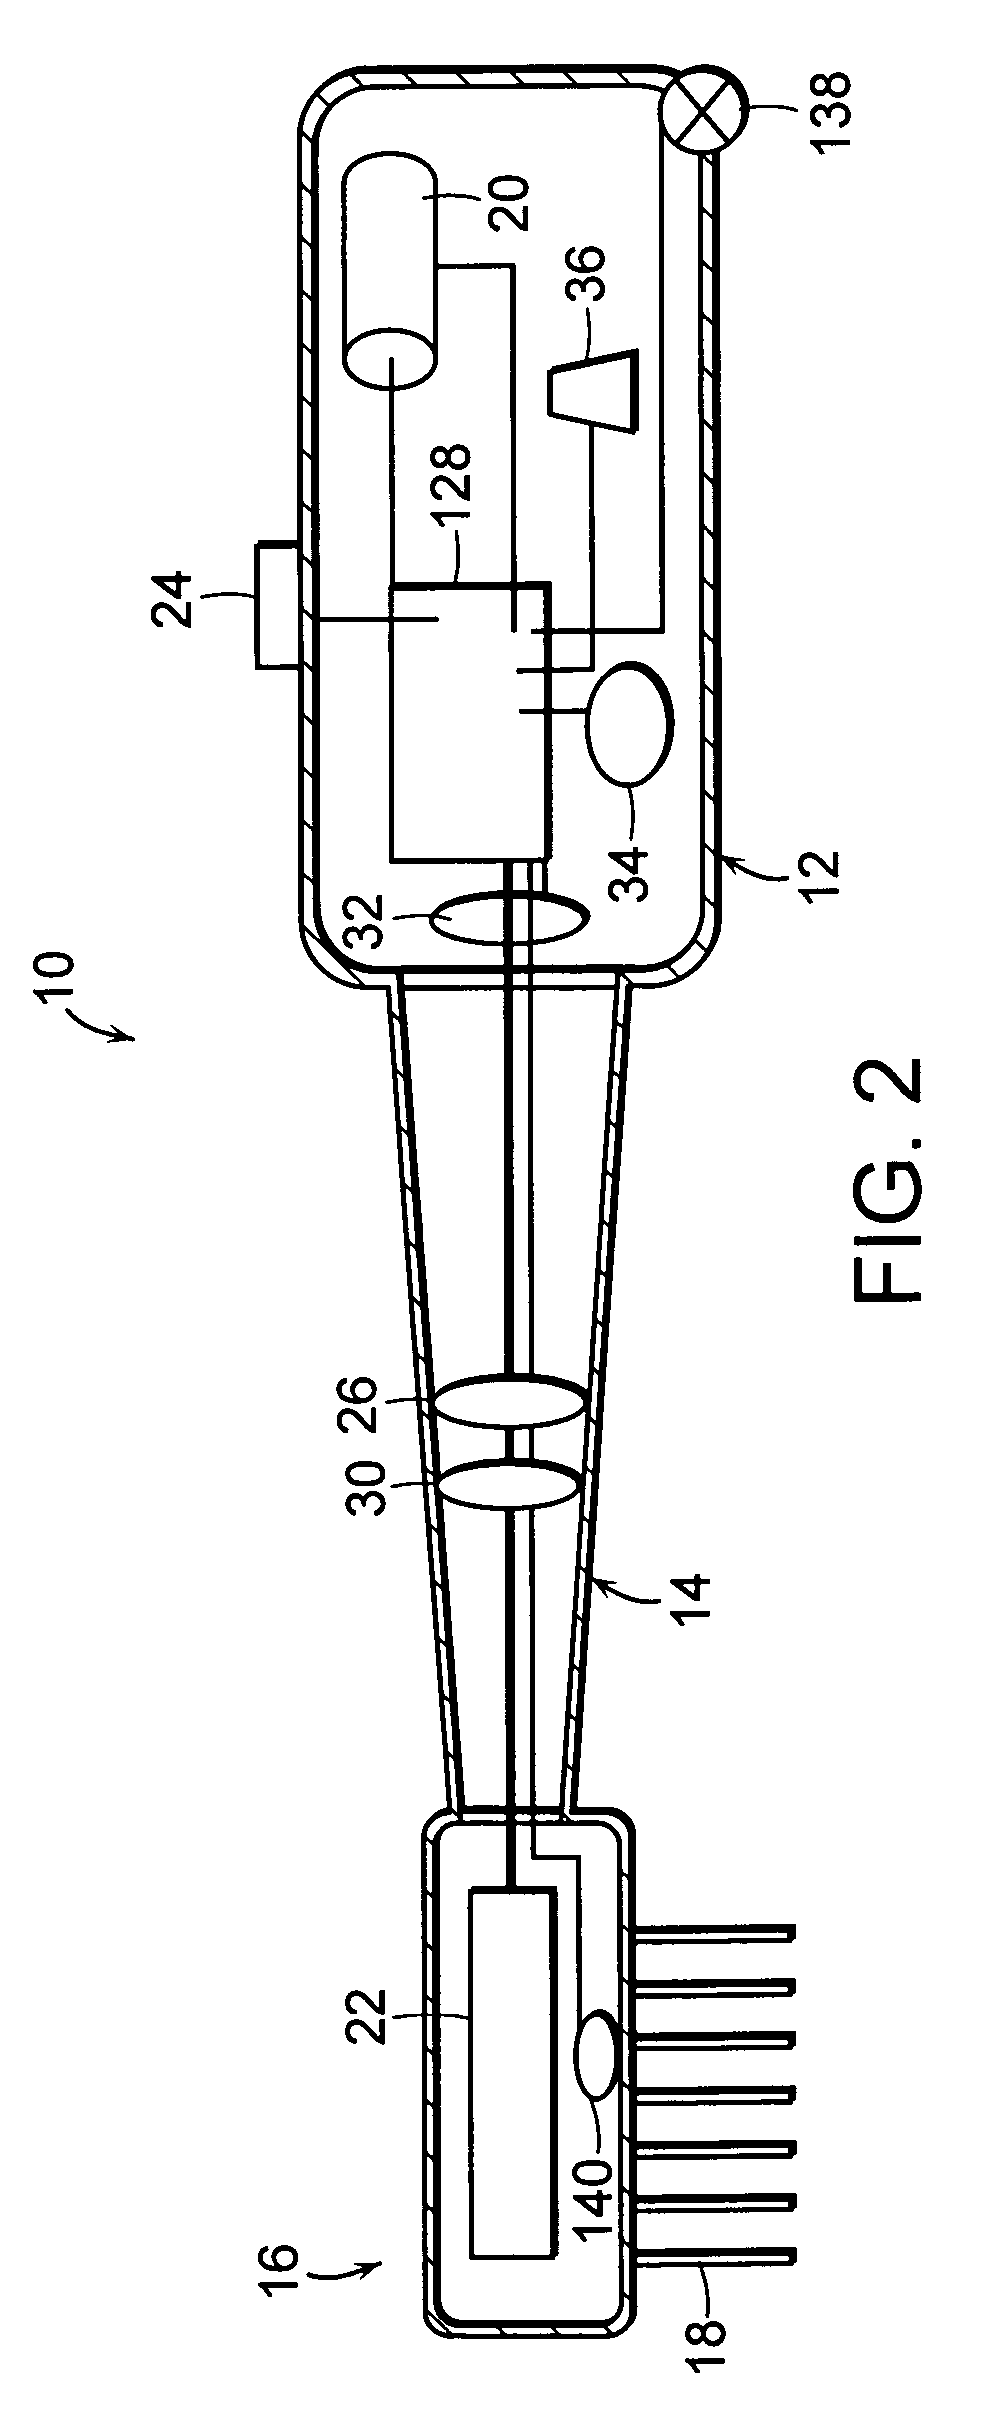 Temperature-regulated heat-emitting device and method of whitening teeth